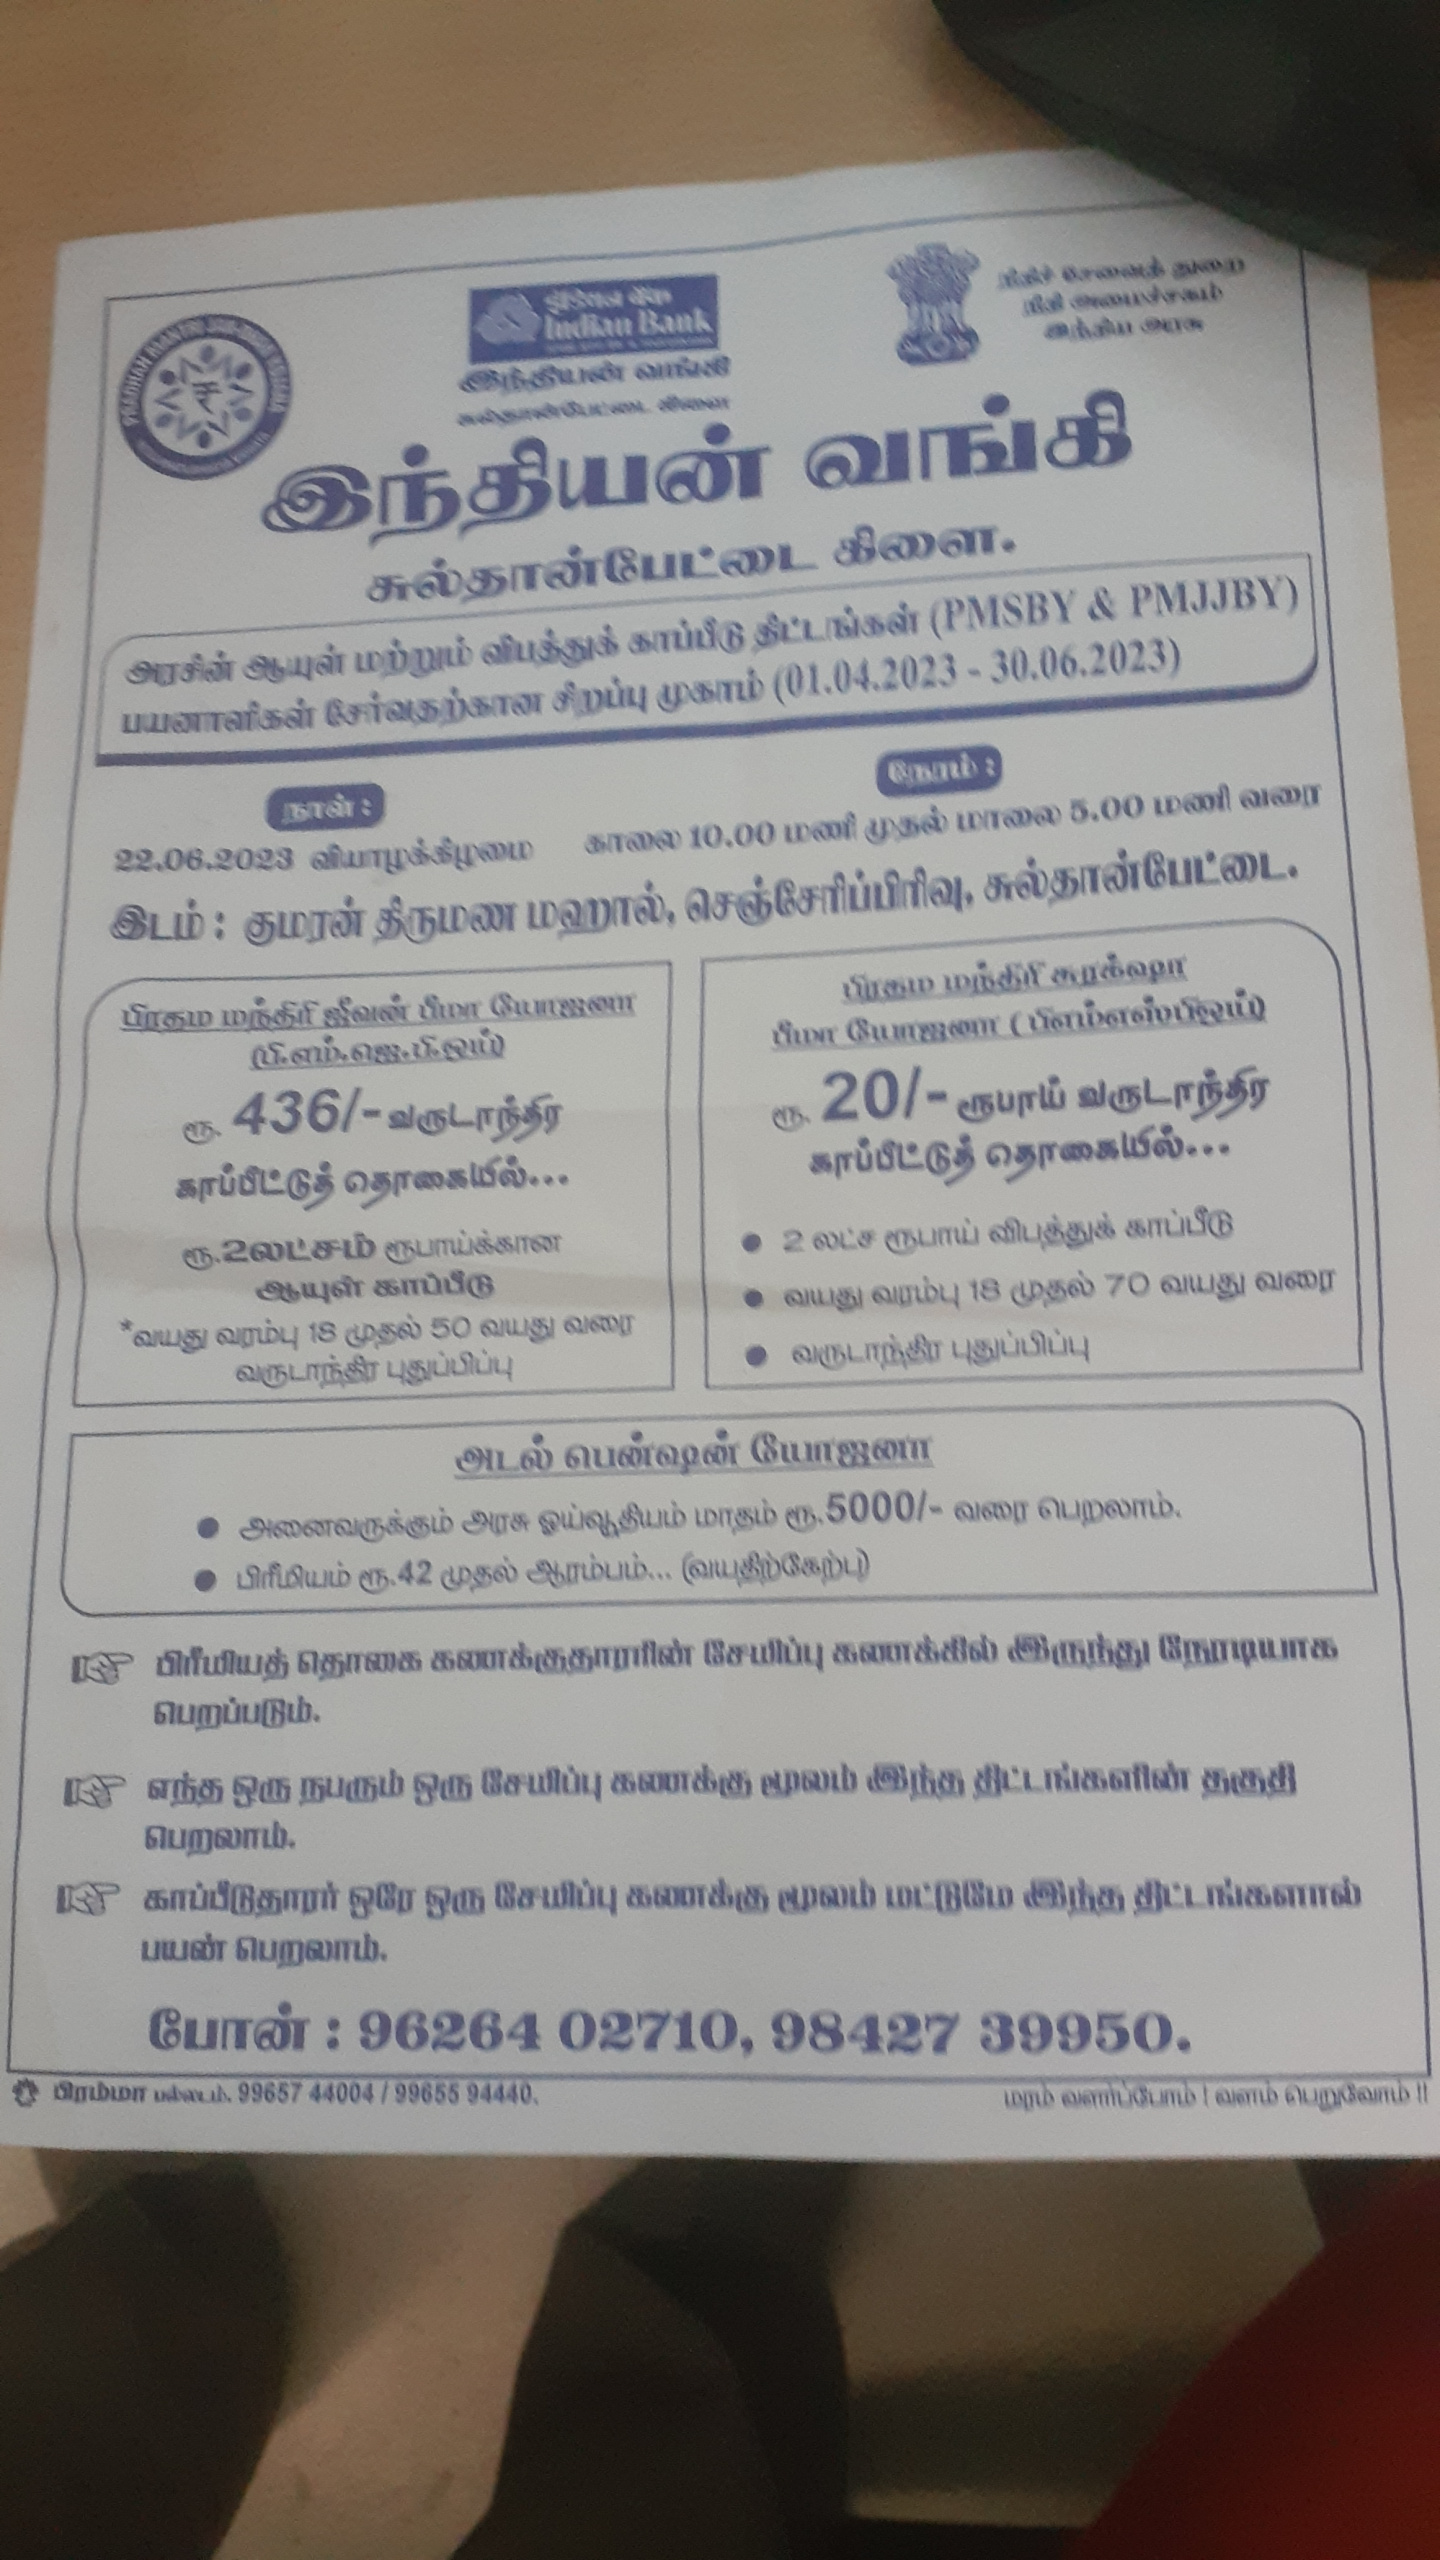 INDIAN BANK SULTANPET ORGANISES NEW CAMPAIGN FOR GOI INSURANCE /PENSION PROGRAMS-PMSBY &PMJBY-APY–22 JUNE 2023